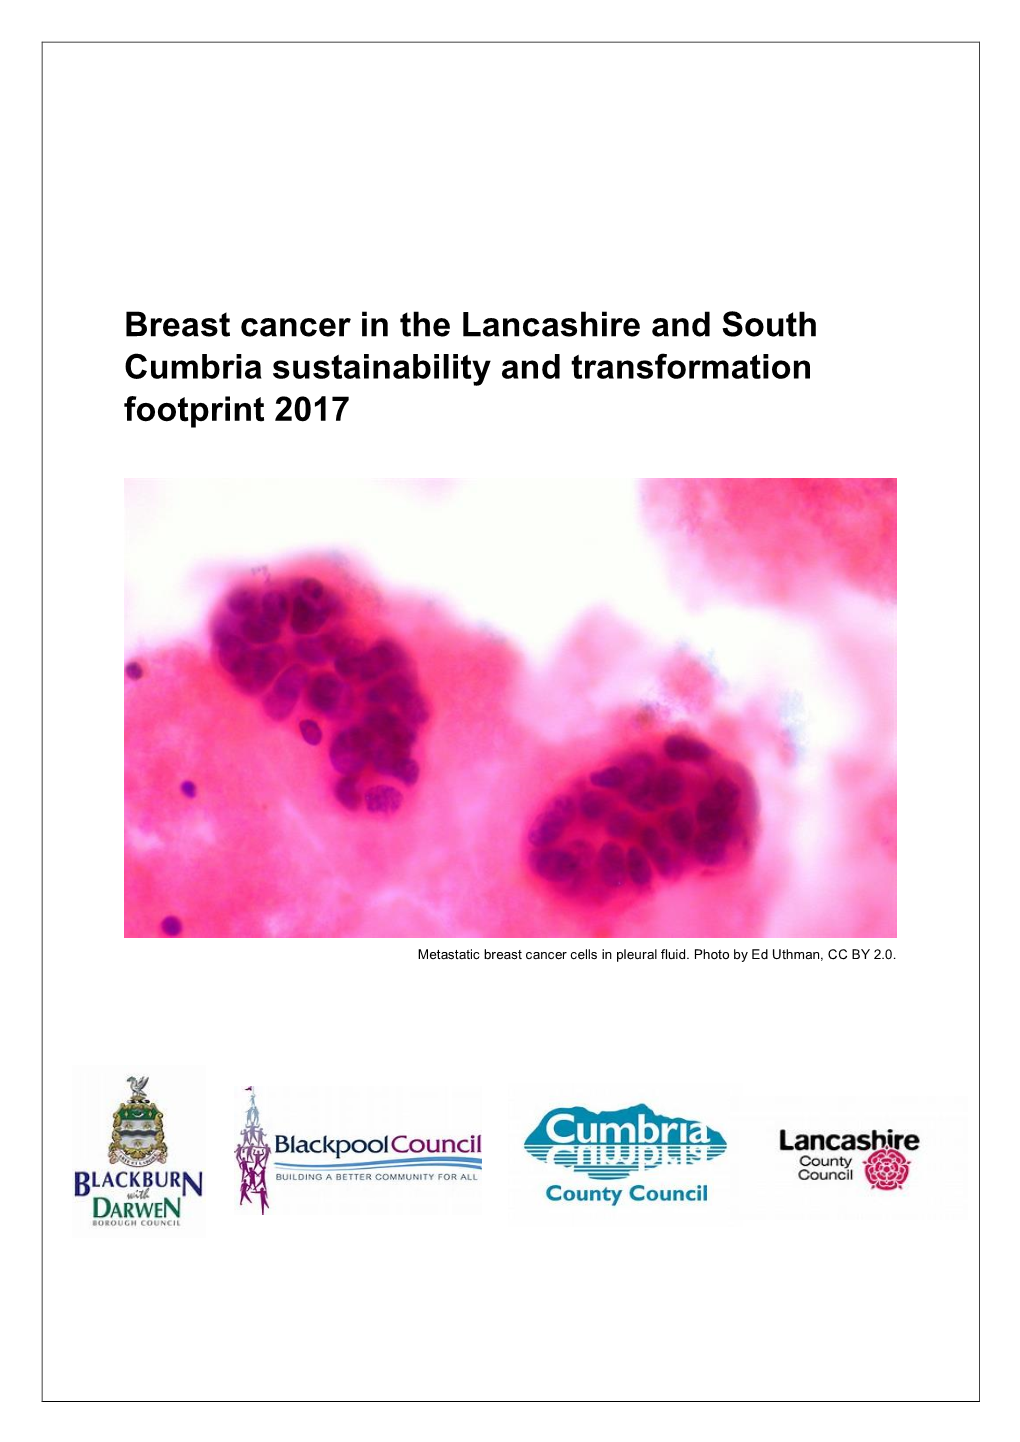 Breast Cancer in the Lancashire and South Cumbria Sustainability and Transformation Footprint 2017